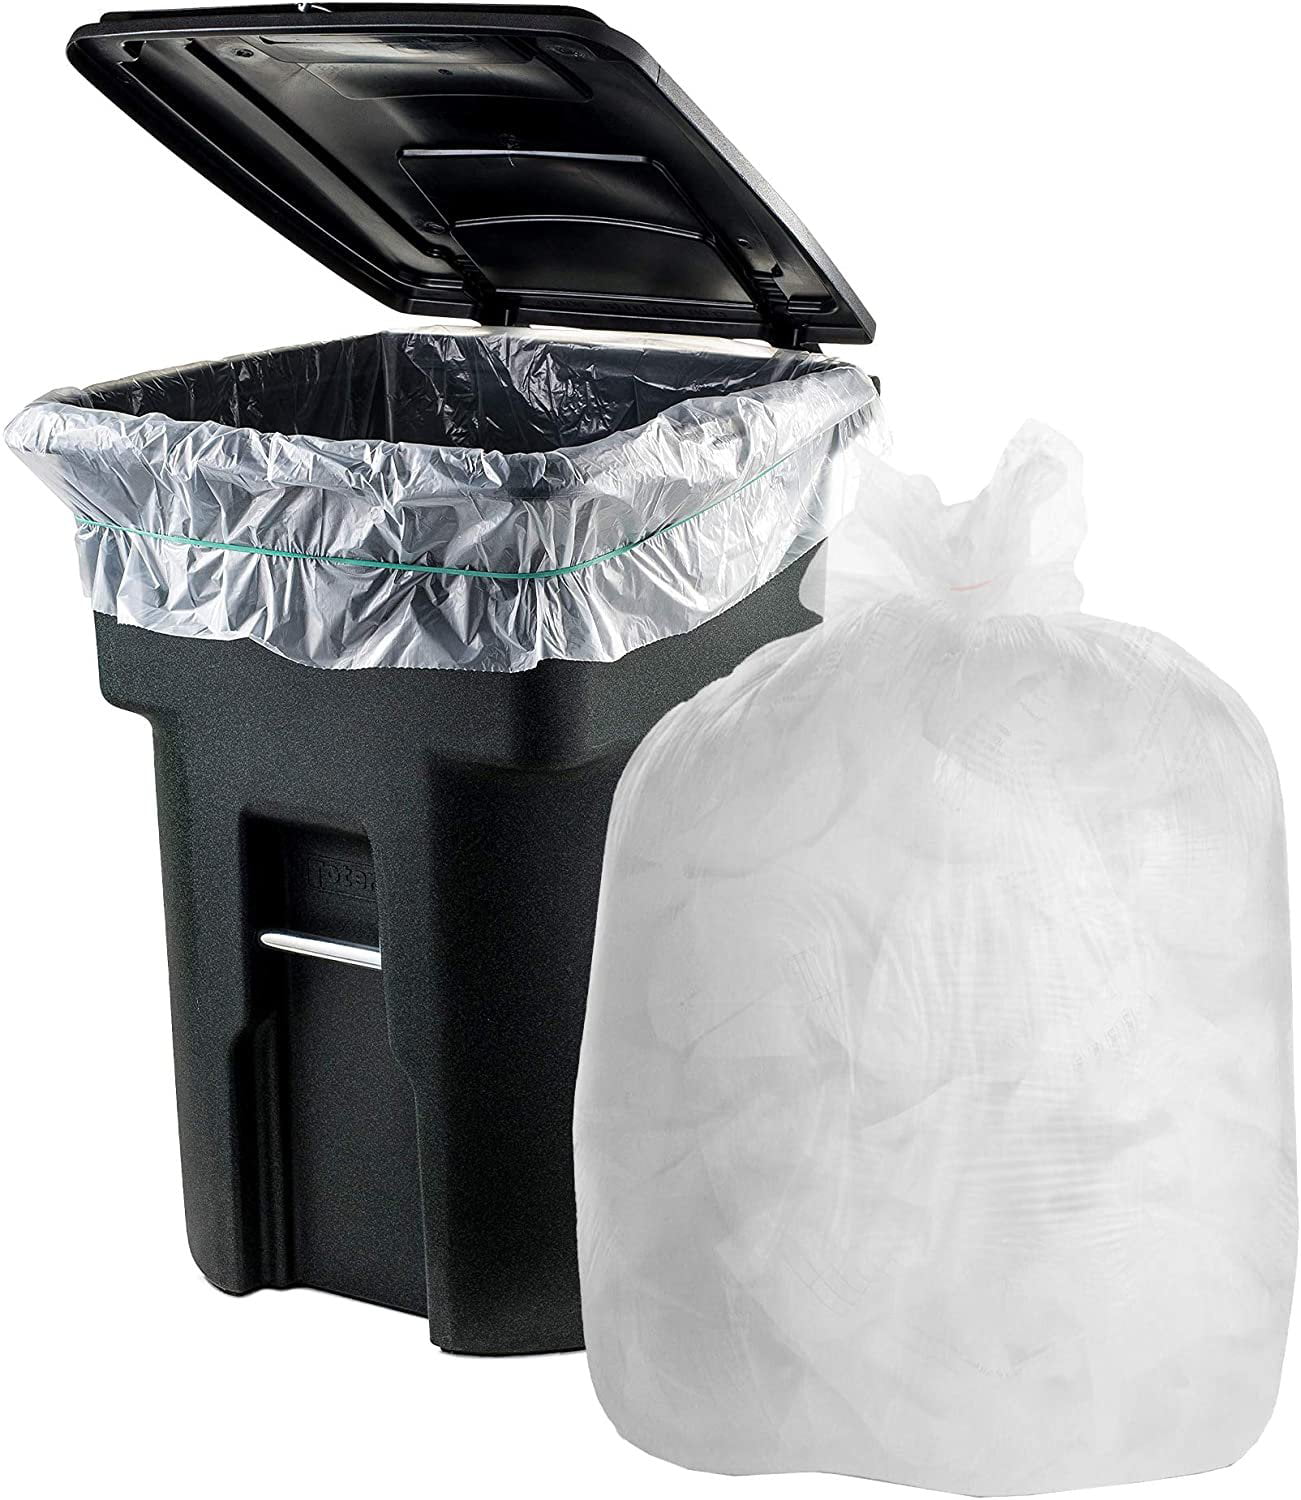 Details about   50 PACK Garbage Trash Bags 42 Gallon Contractor Plastic Bag Heavy Duty Black NEW 